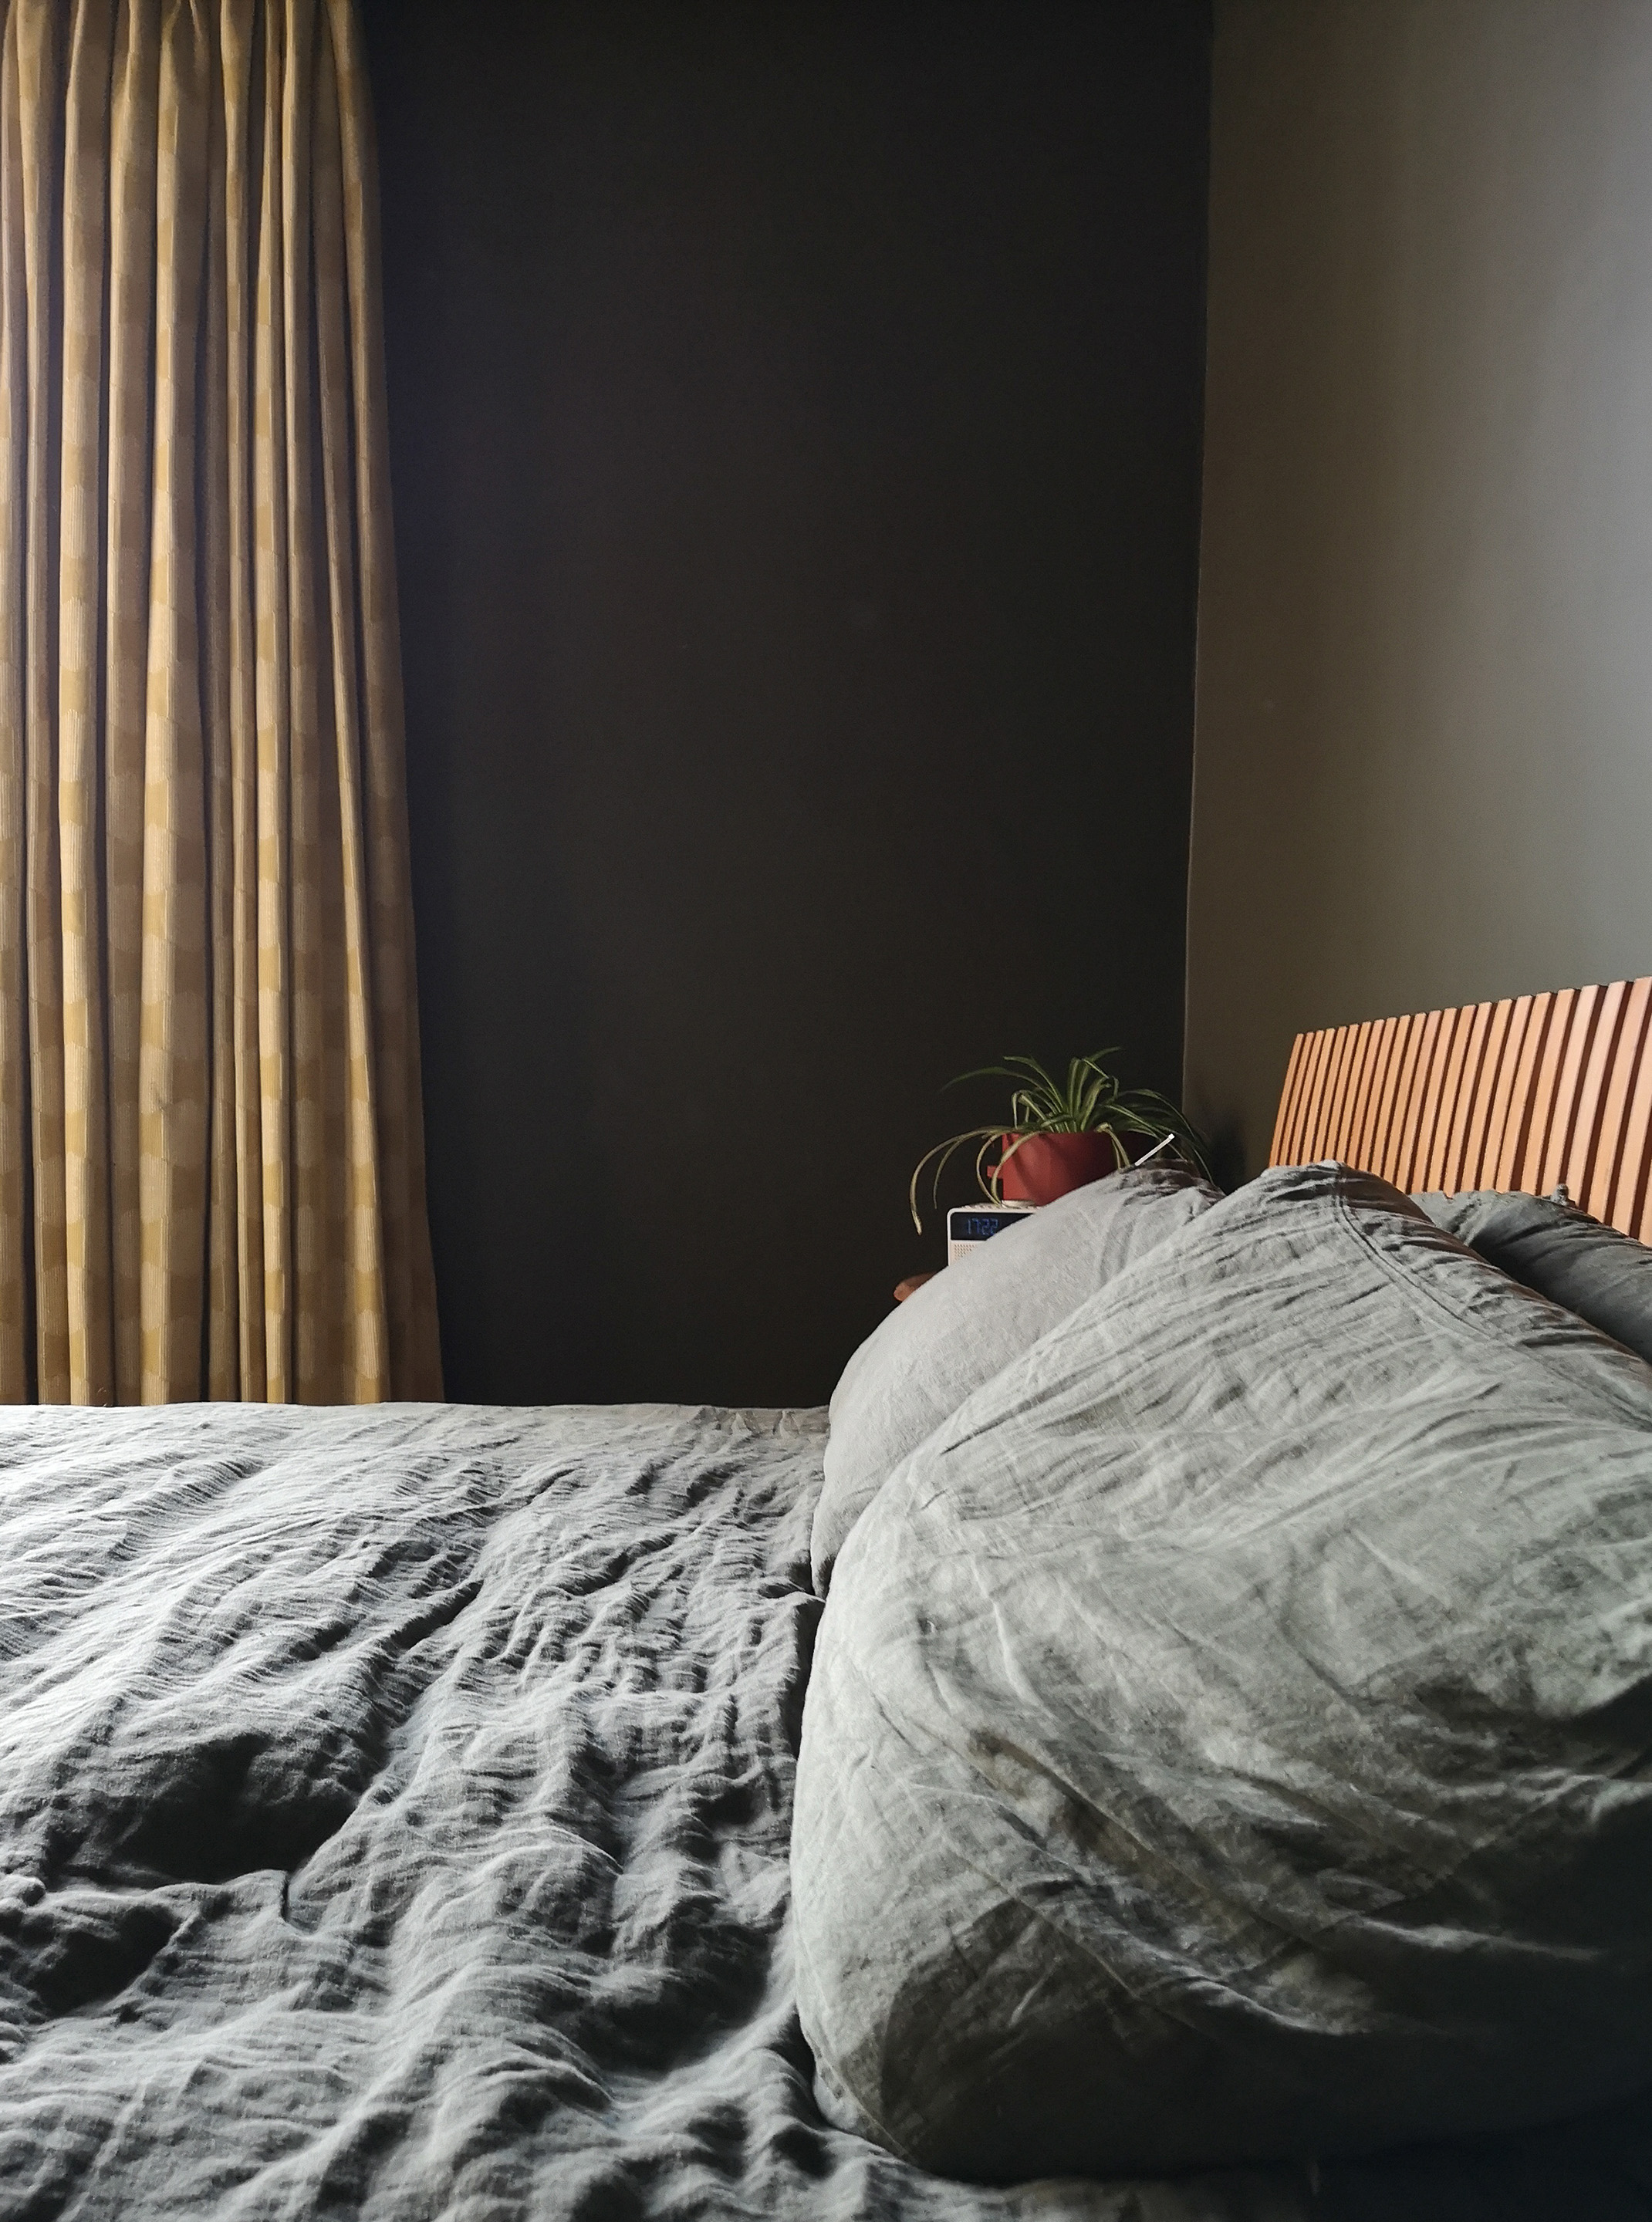 Crumpled linen bedding emphasises the relaxed comforting vibe of this dark green bedroom. Extra thick lined curtains provide complete darkness and a luxury hotel feel.